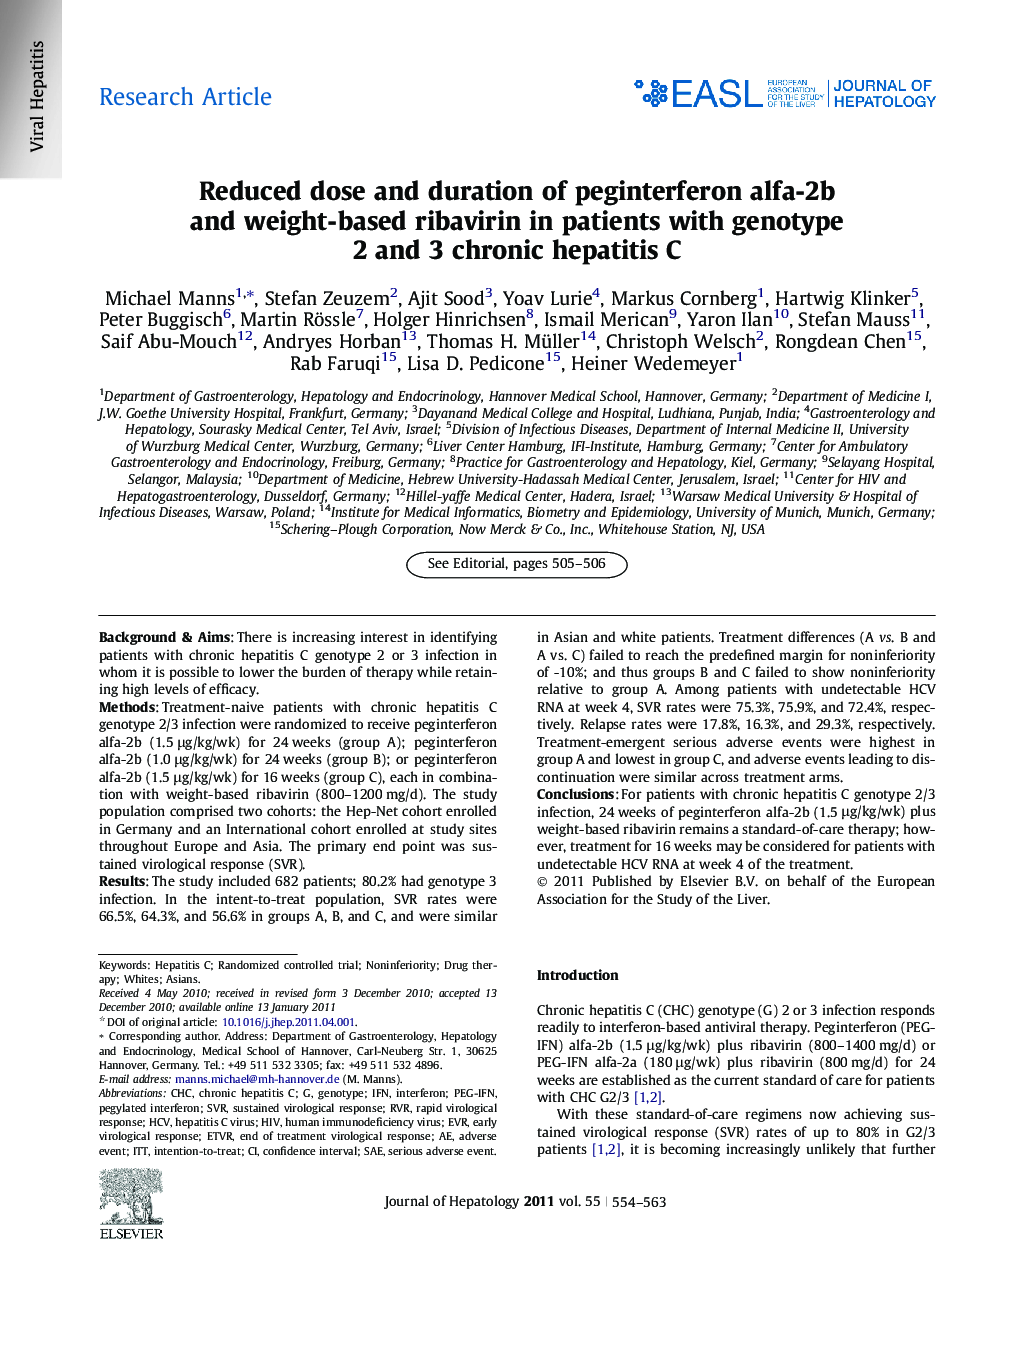 Research ArticleReduced dose and duration of peginterferon alfa-2b and weight-based ribavirin in patients with genotype 2 and 3 chronic hepatitis C